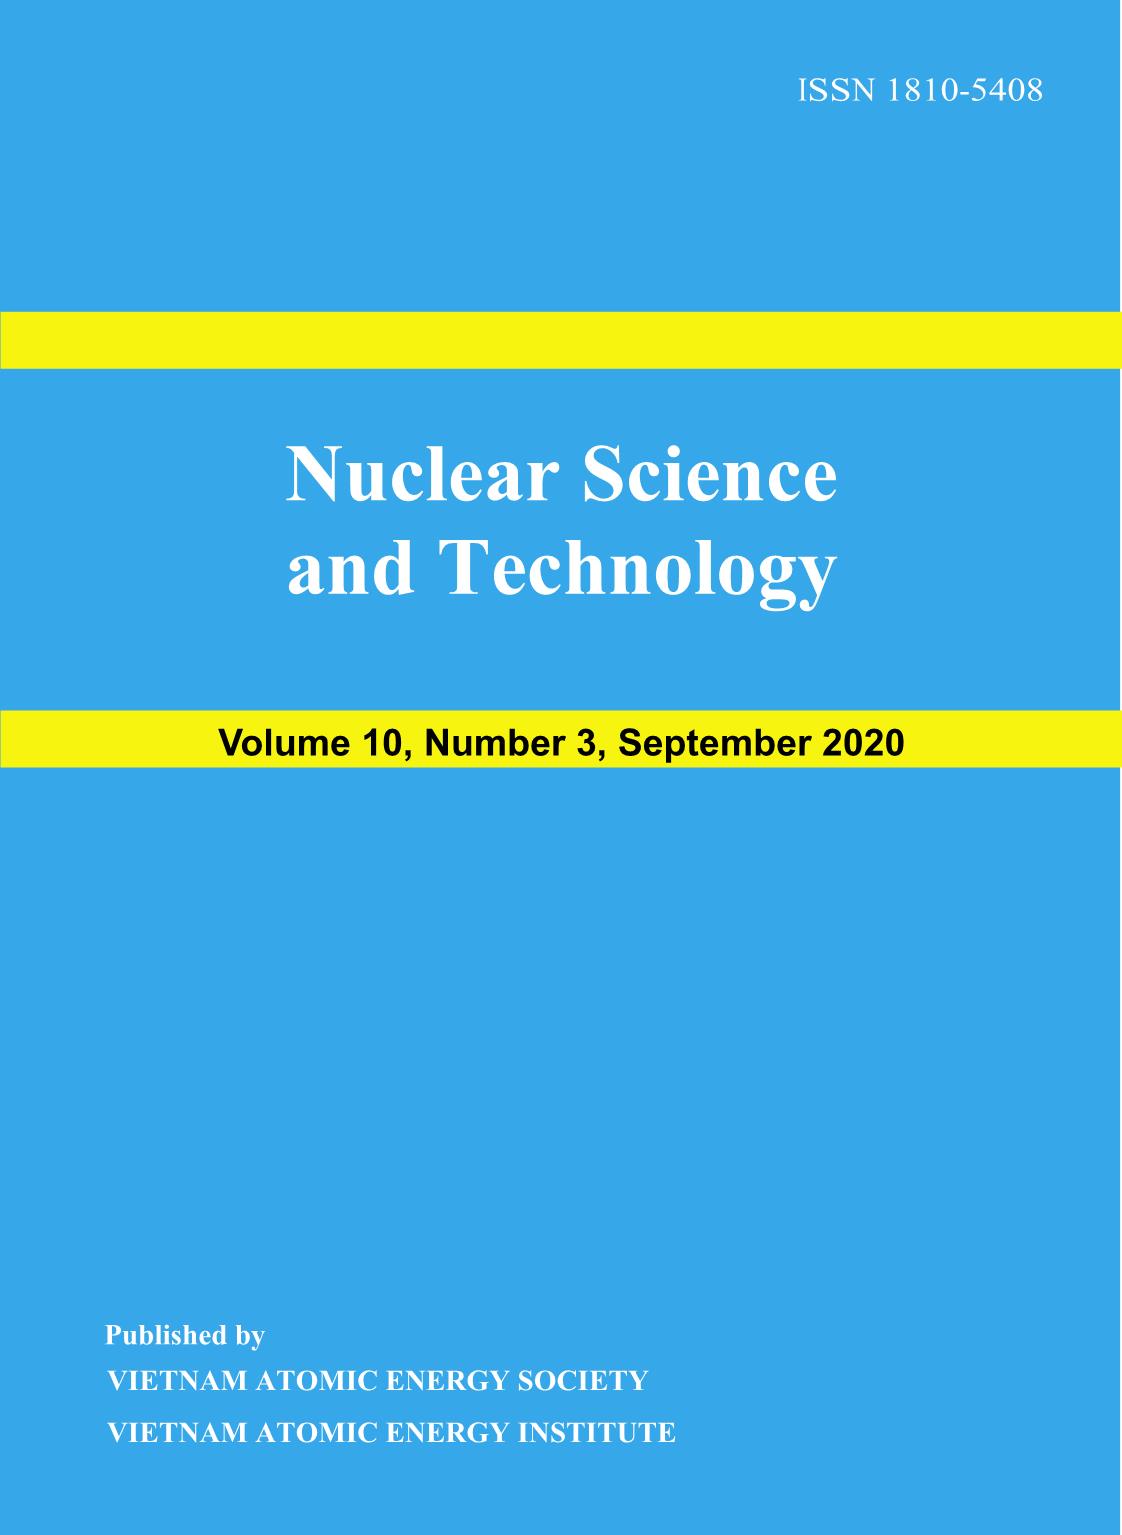 Nuclear Science and Technology - Volume 10, Number 3, September 2020 trang 1